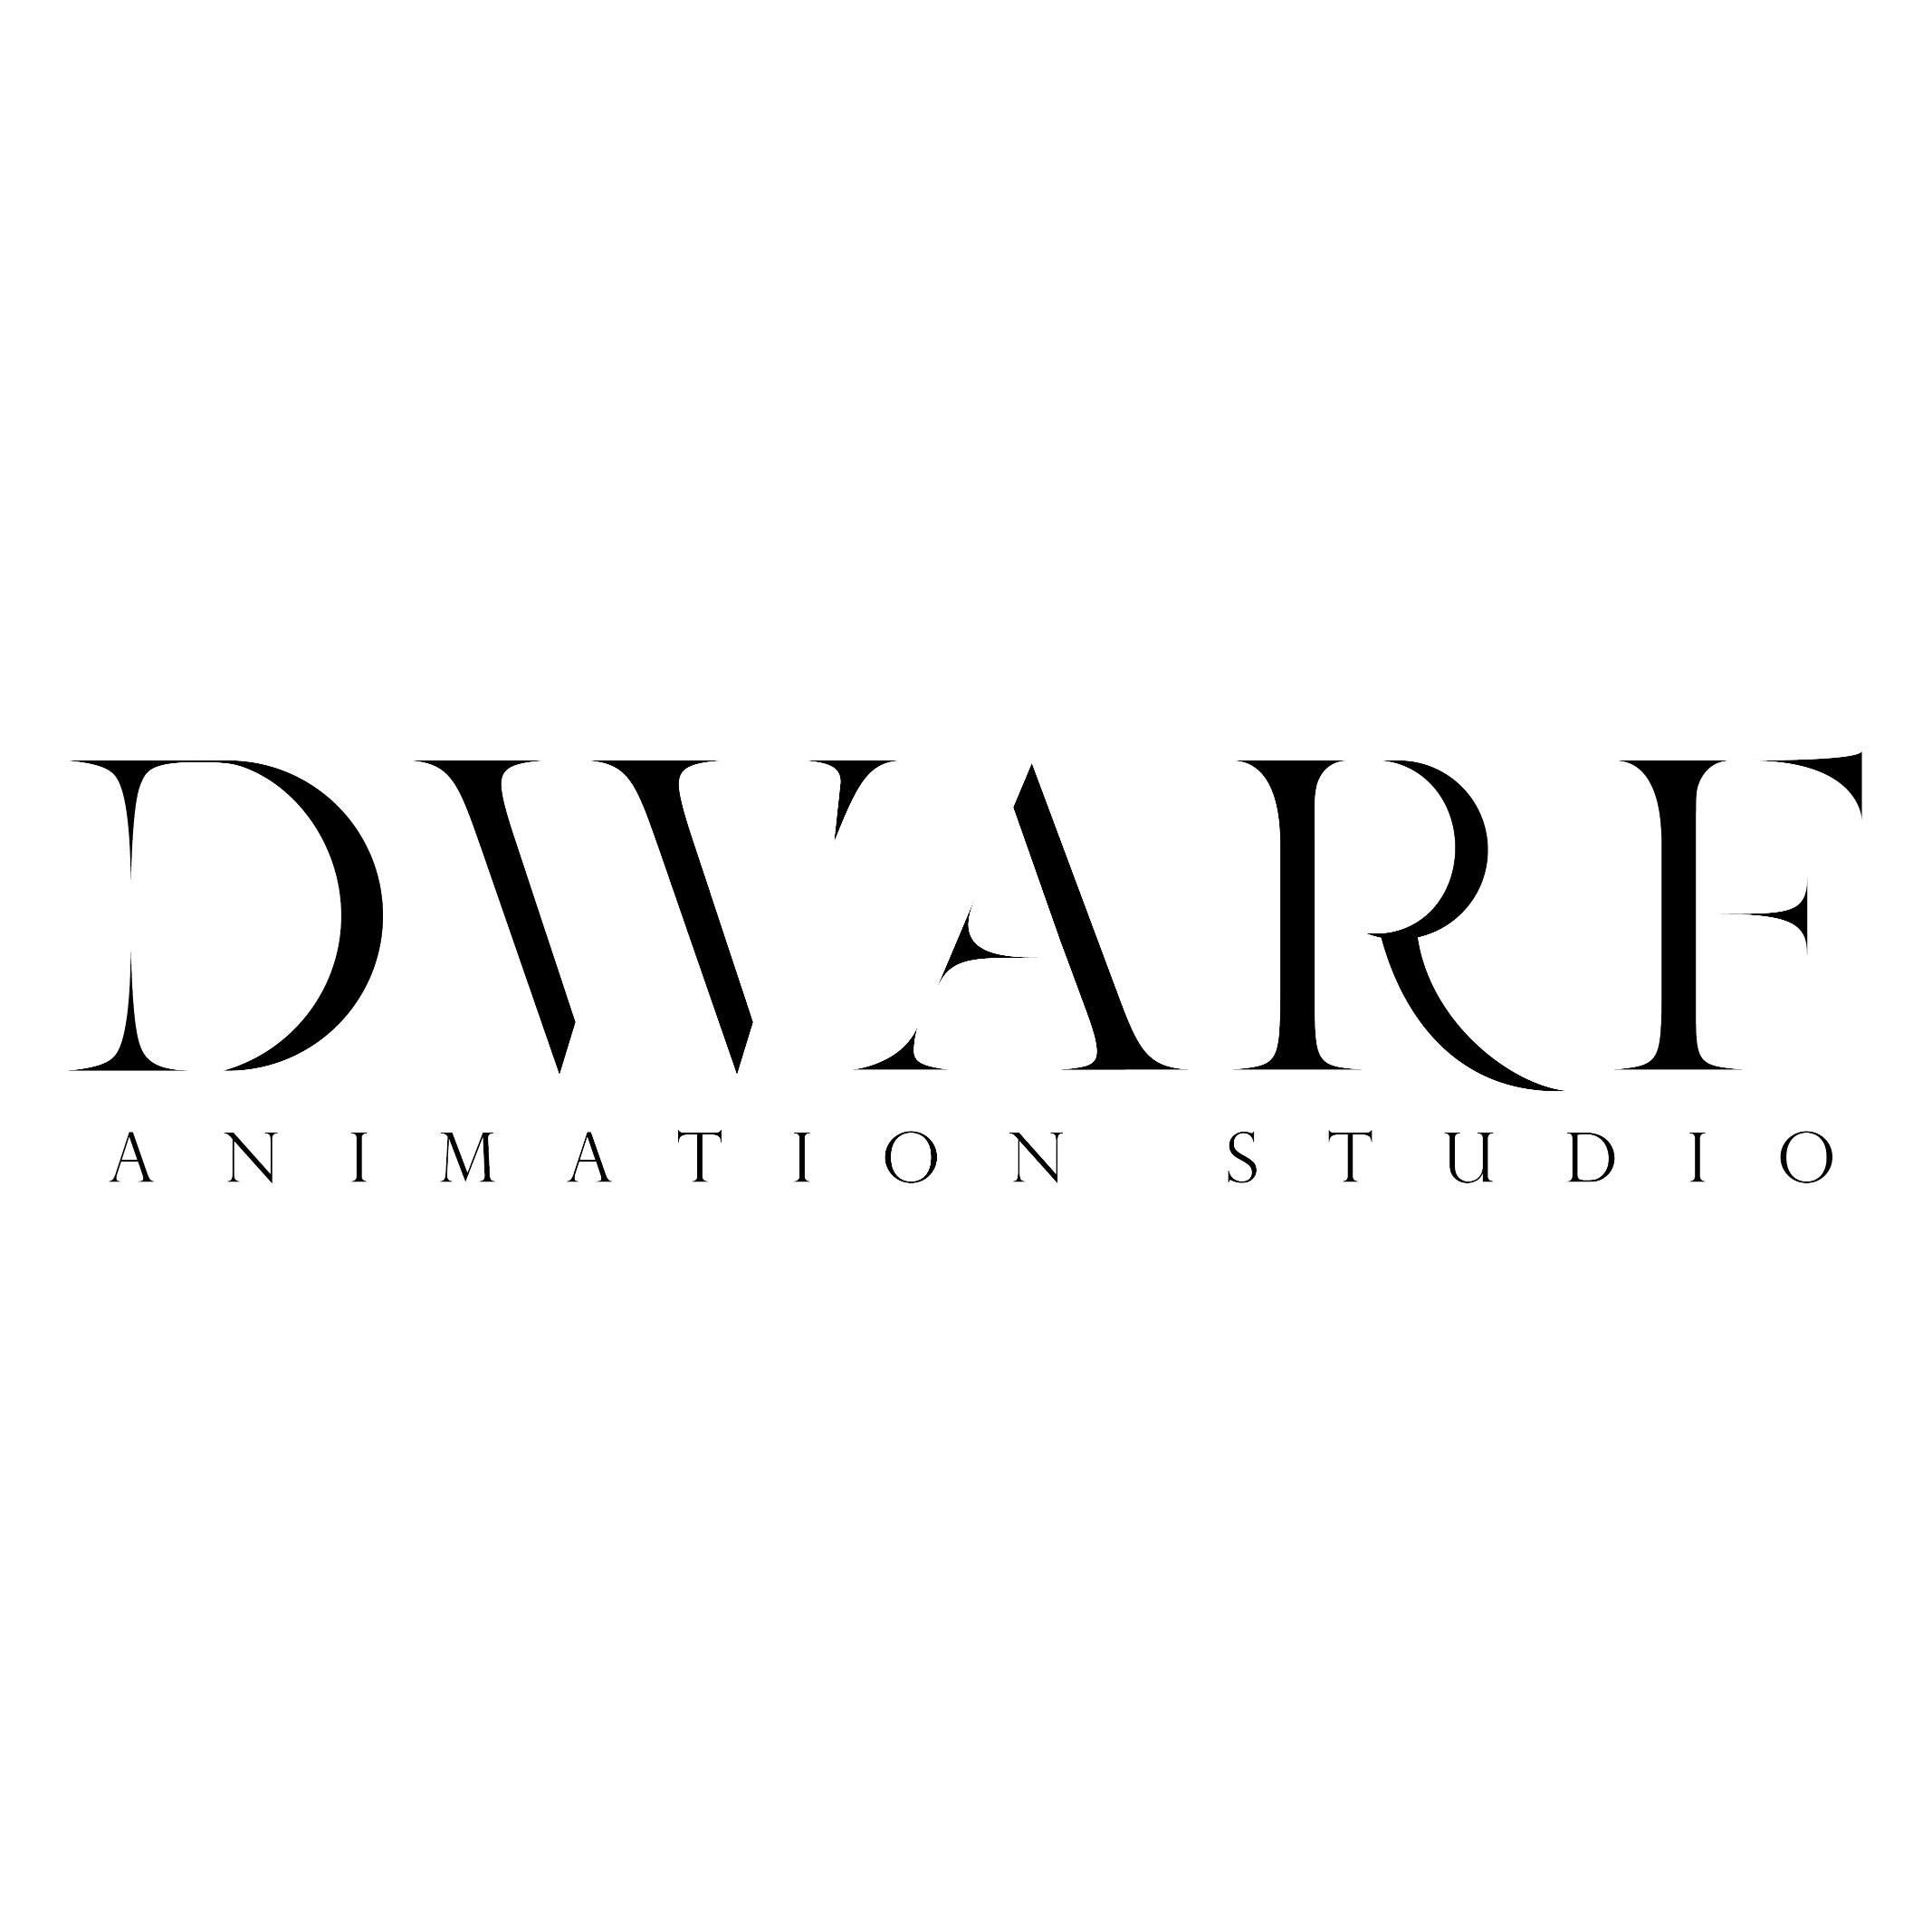 The CG, Animation and VFX studio in France. #Animation #3d #vfx #cgi